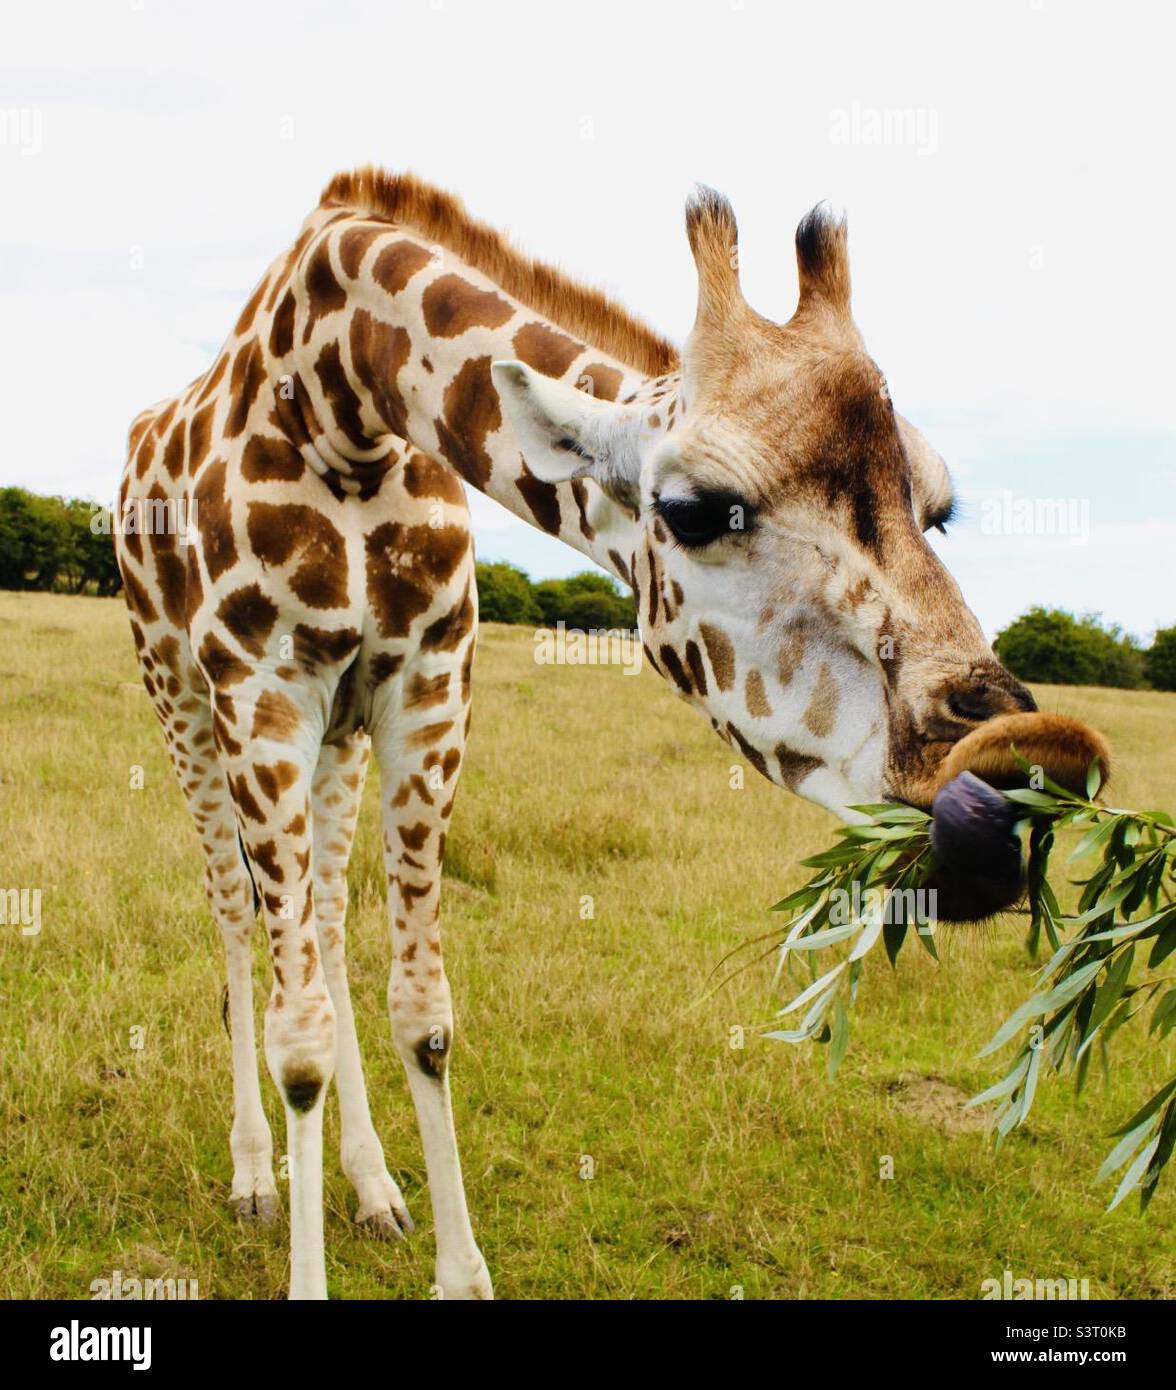 Young giraffe eating leaves Stock Photo